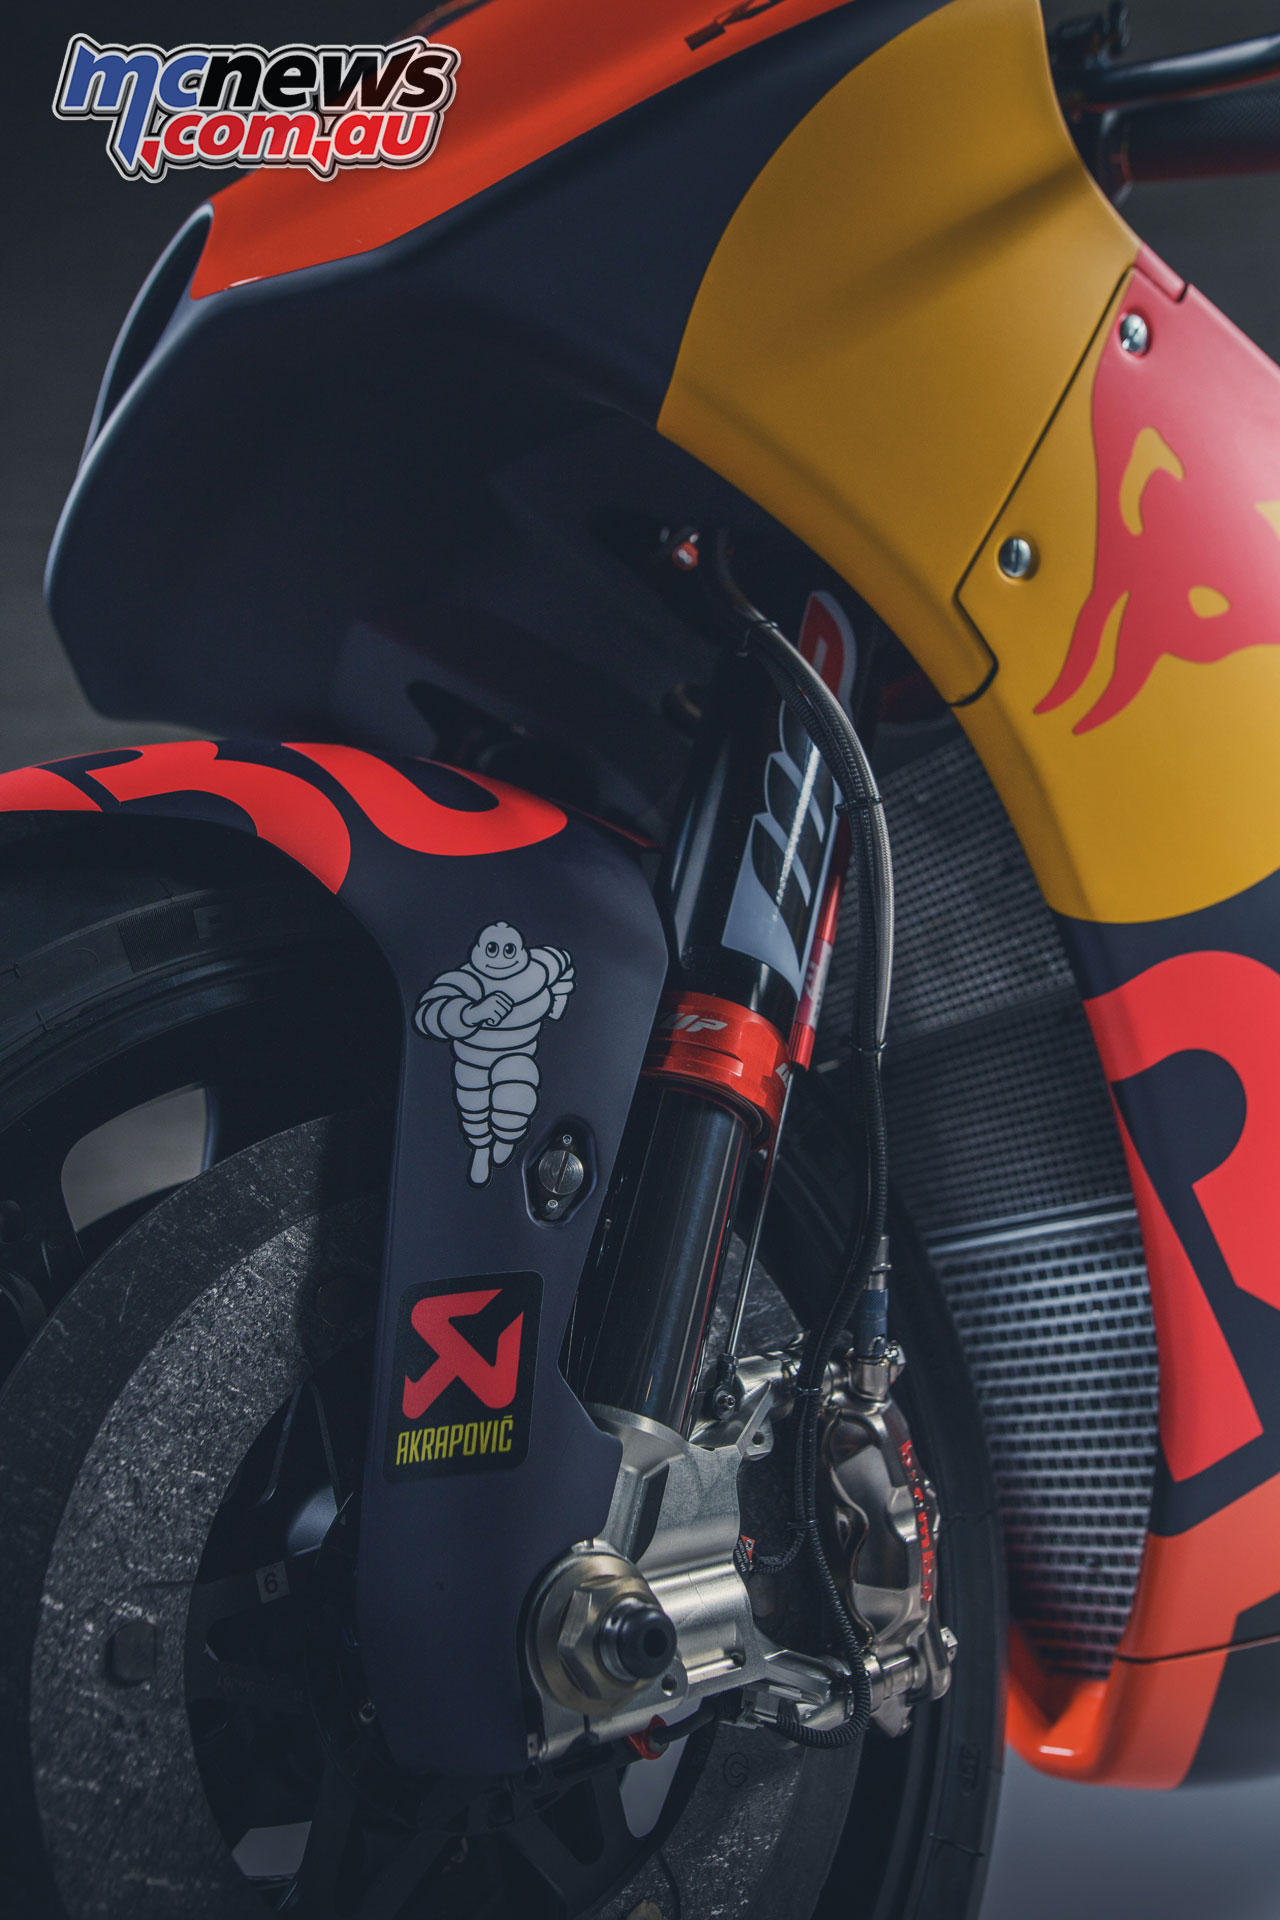 2019 Red Bull Ktm Motogp Ready To Race Motorcycle News Sport And Reviews